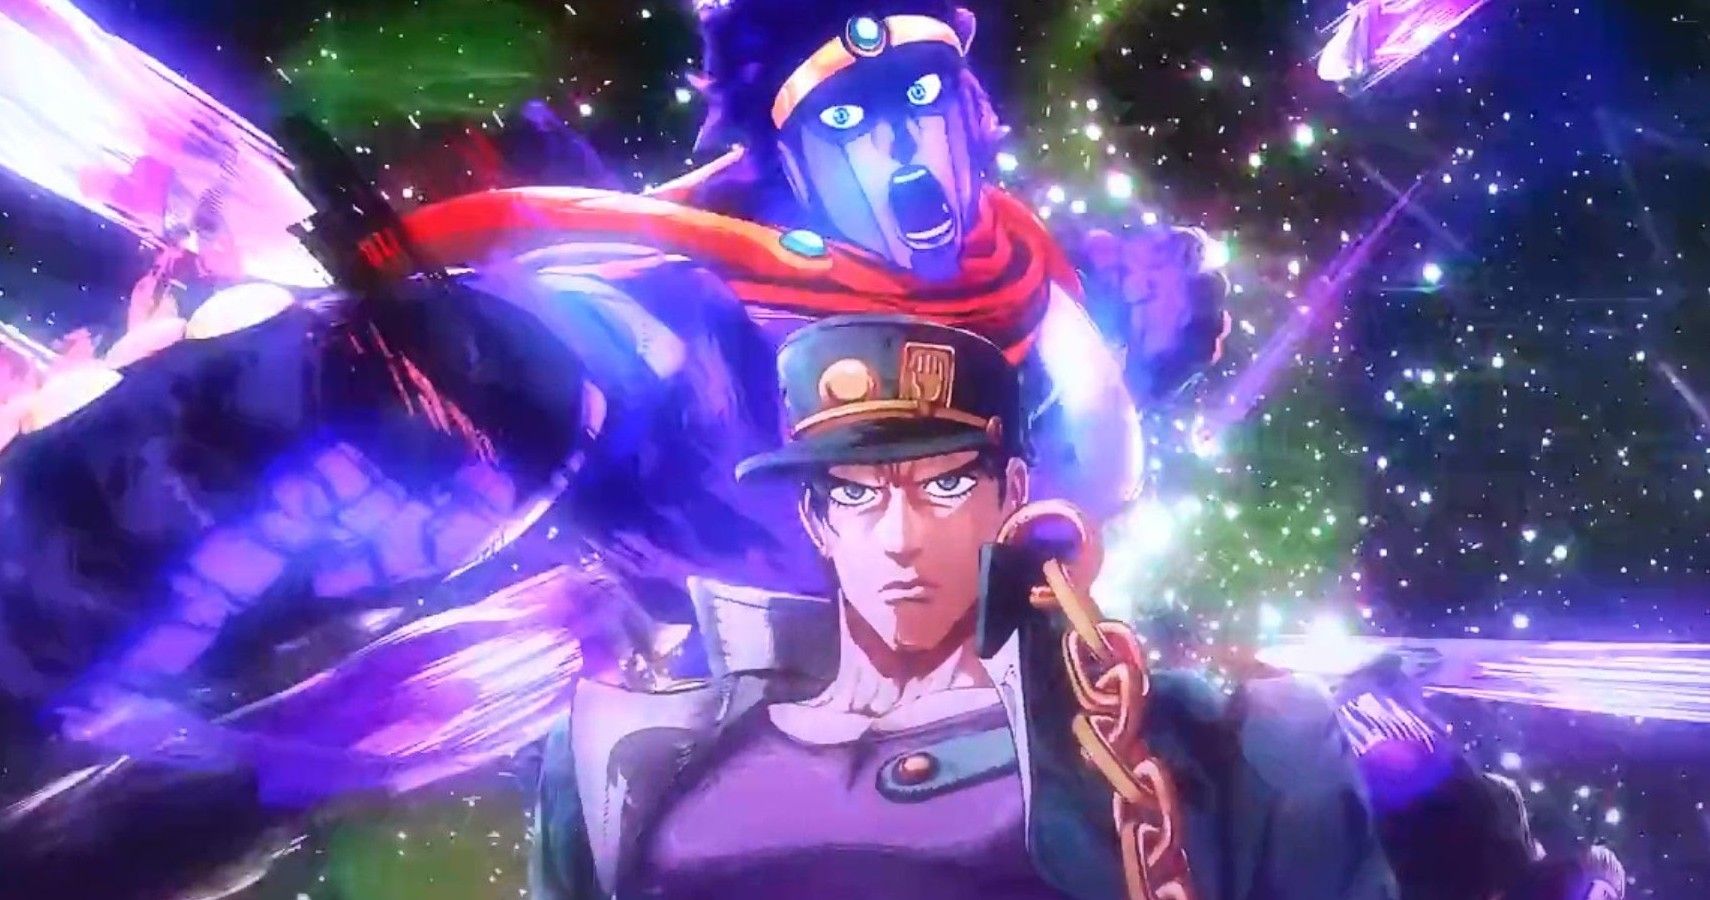 So it's the same type of Stand as Silver Chariot 